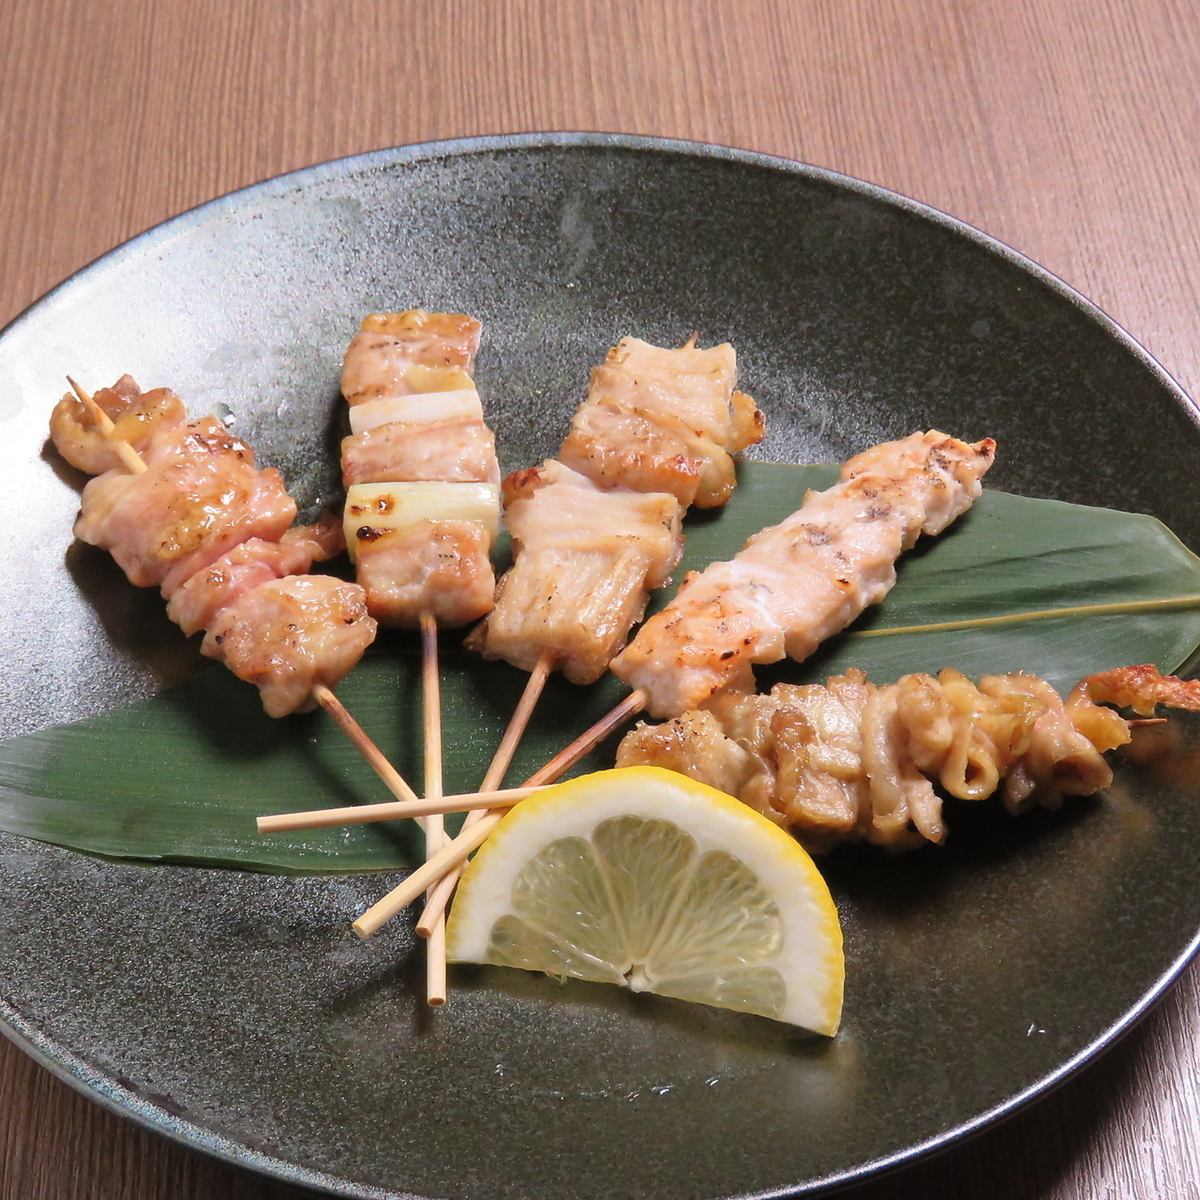 We have everything from standard yakitori to skewered Hakata vegetable rolls!